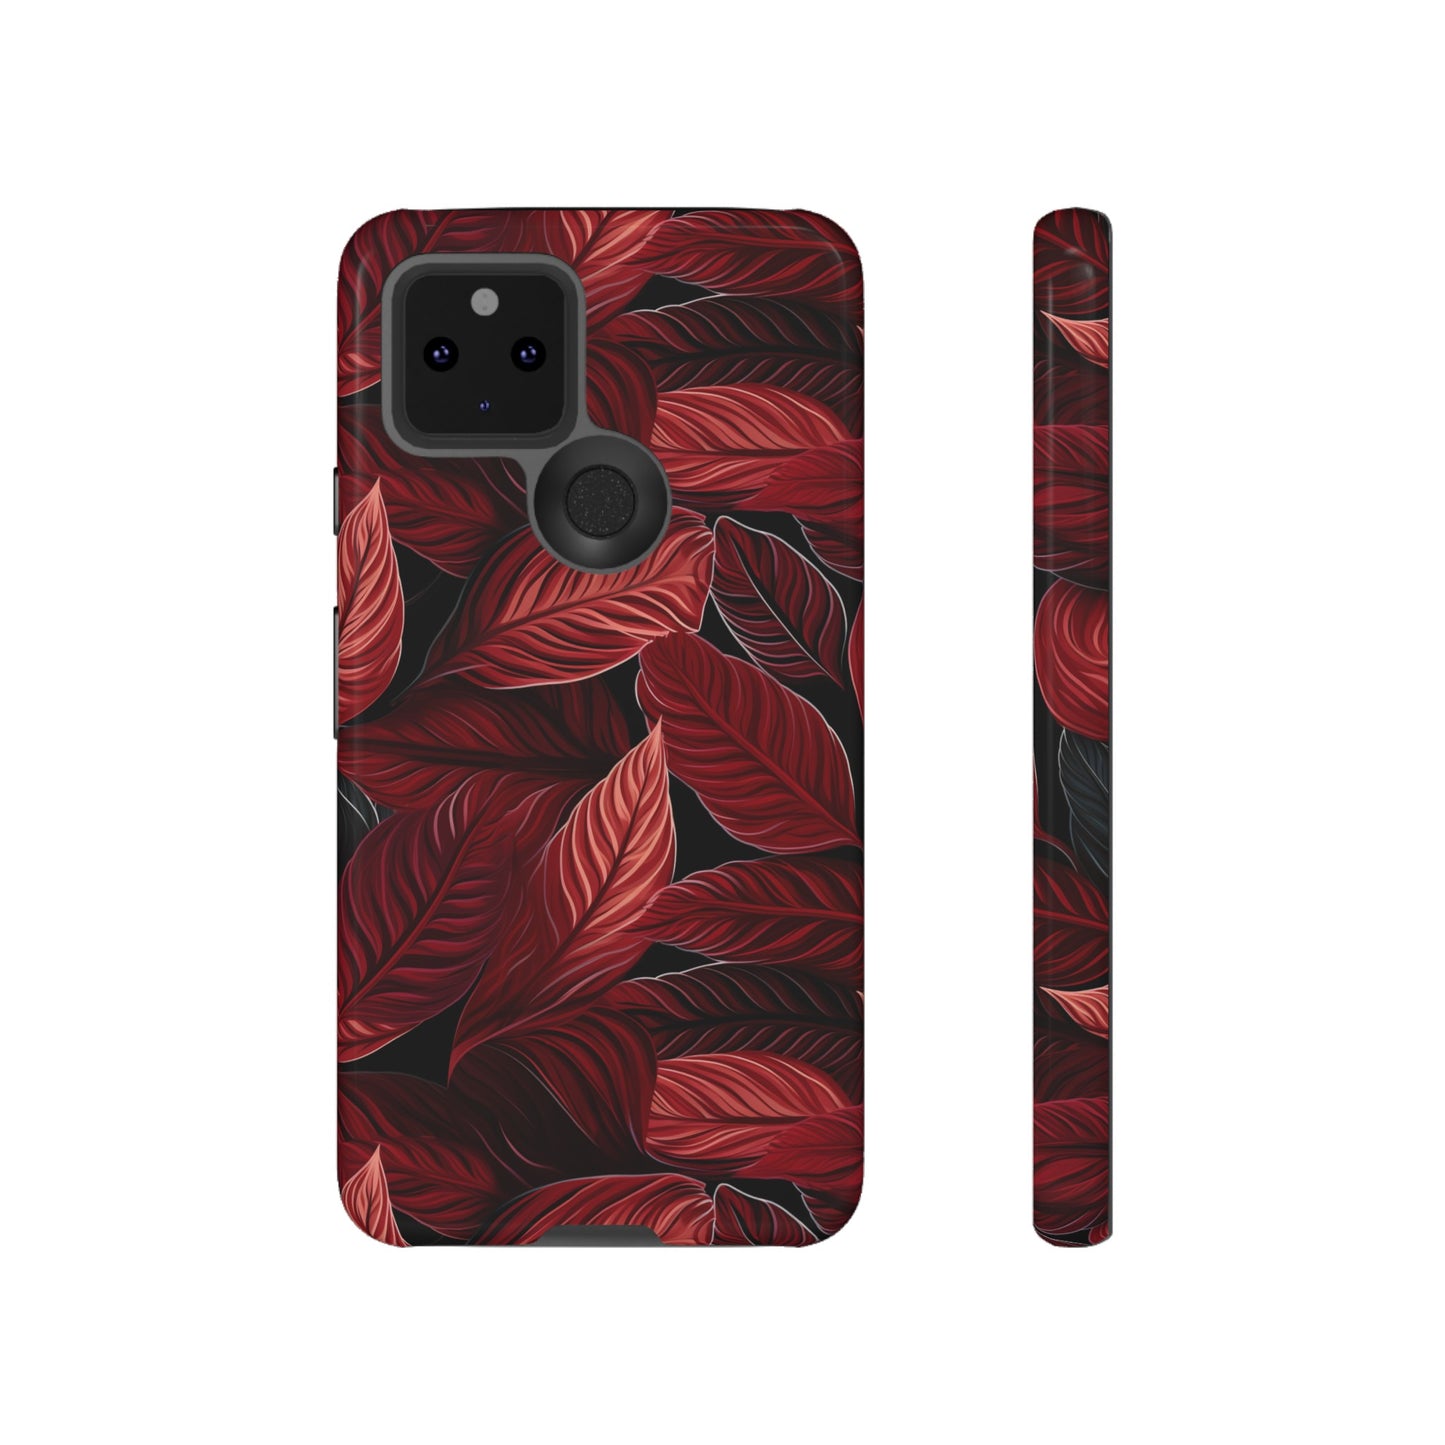 Scarlet Whispers: Lush Autumn Colours in Botanical Bliss - Tough Phone Case